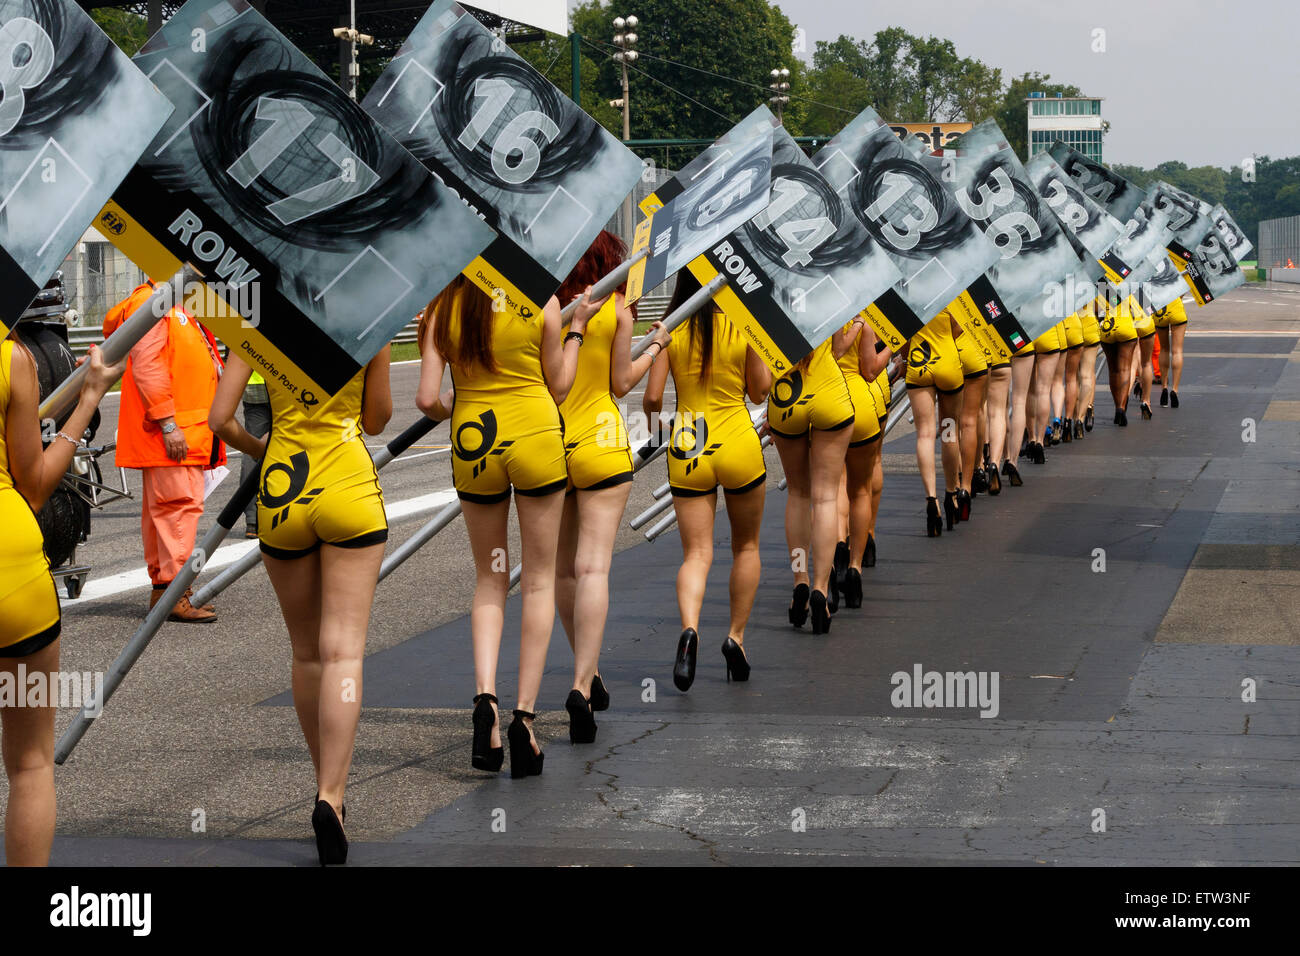 Monza, Italy - May 30, 2015: A grid girl poses during the FIA FORMULA 3 EUROPEAN CHAMPIONSHIP Stock Photo